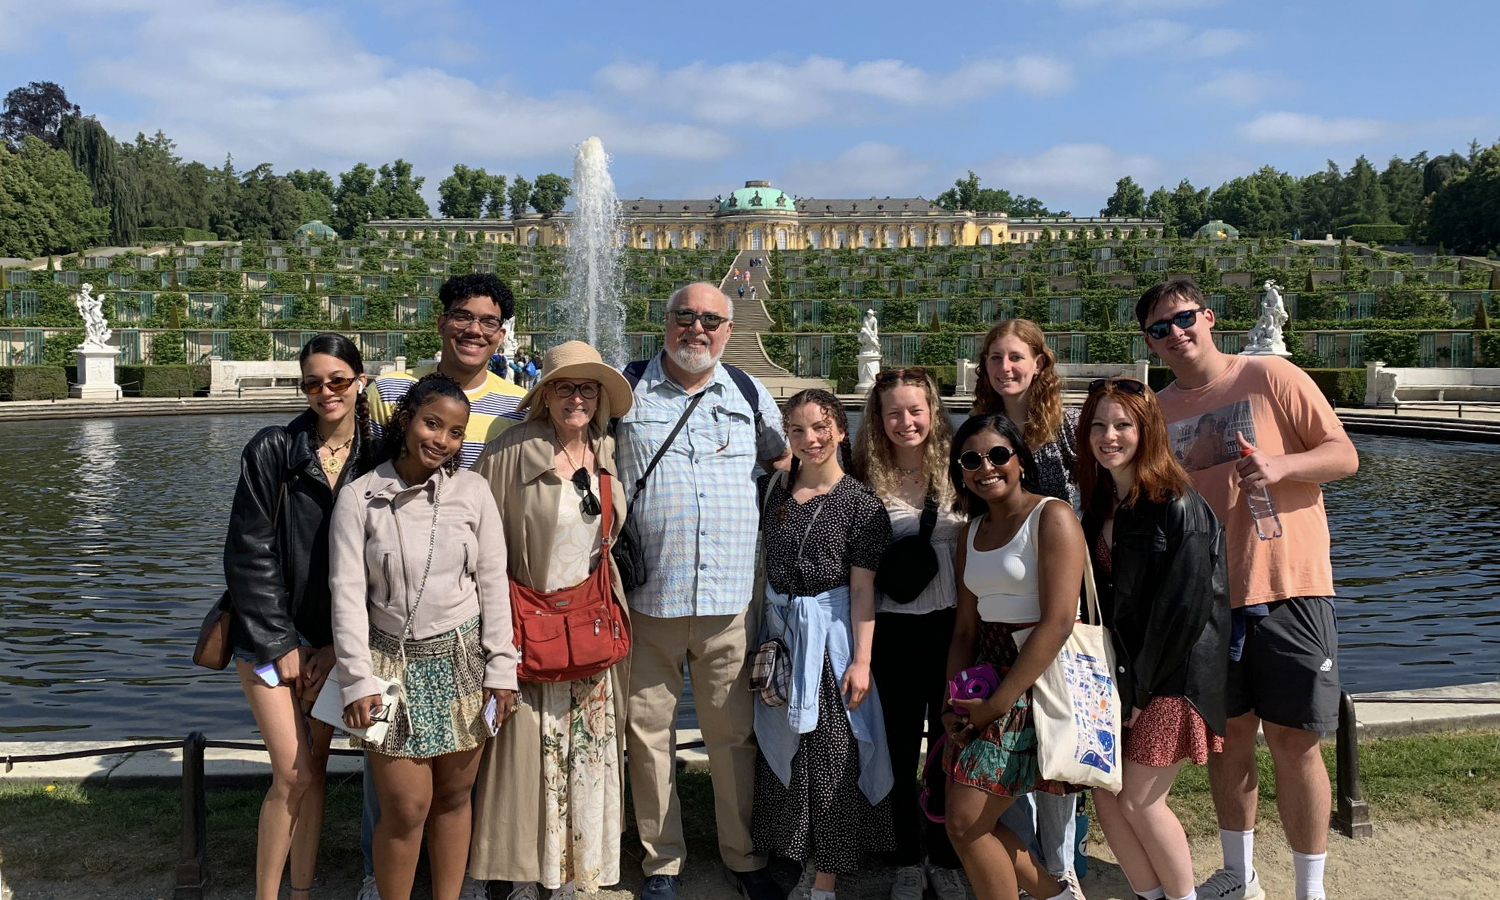 In This Week in Photos, we feature 19 locations across the globe where HWS students studied in 2023. Here, Professor of Sociology Jack Harris and his students visit Sanssouci Palace garden In Potsdam, Germany.